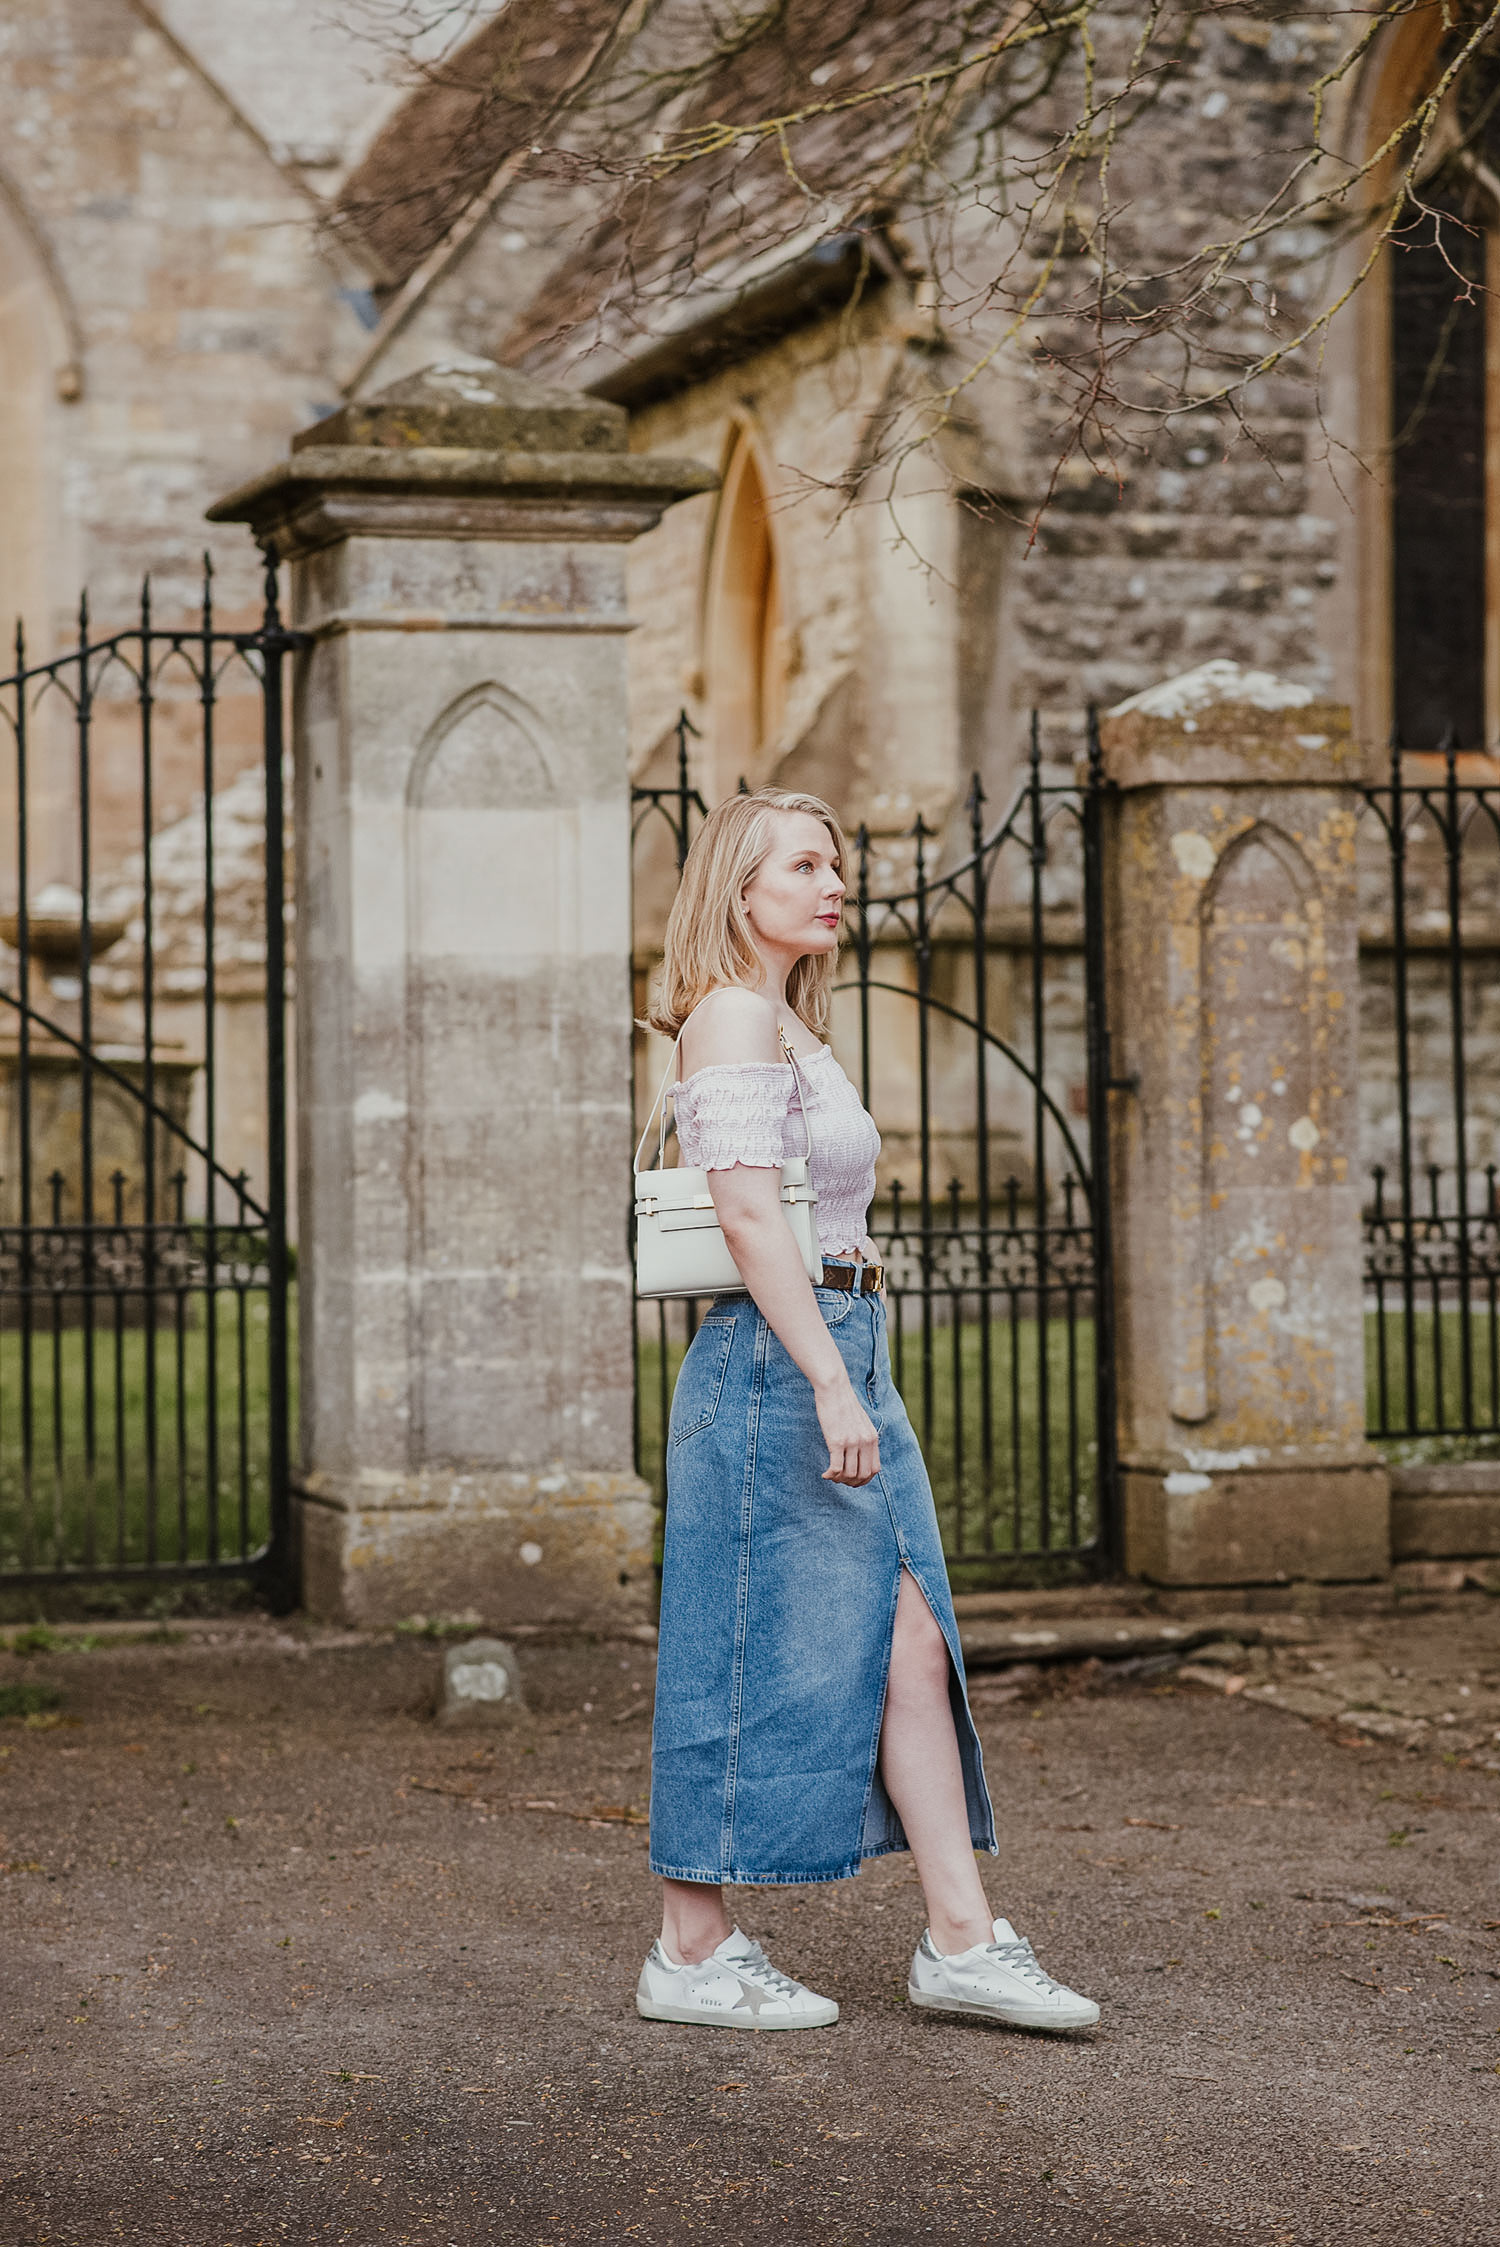 The Appetite For Denim Maxi-Skirts Is Ongoing | British Vogue